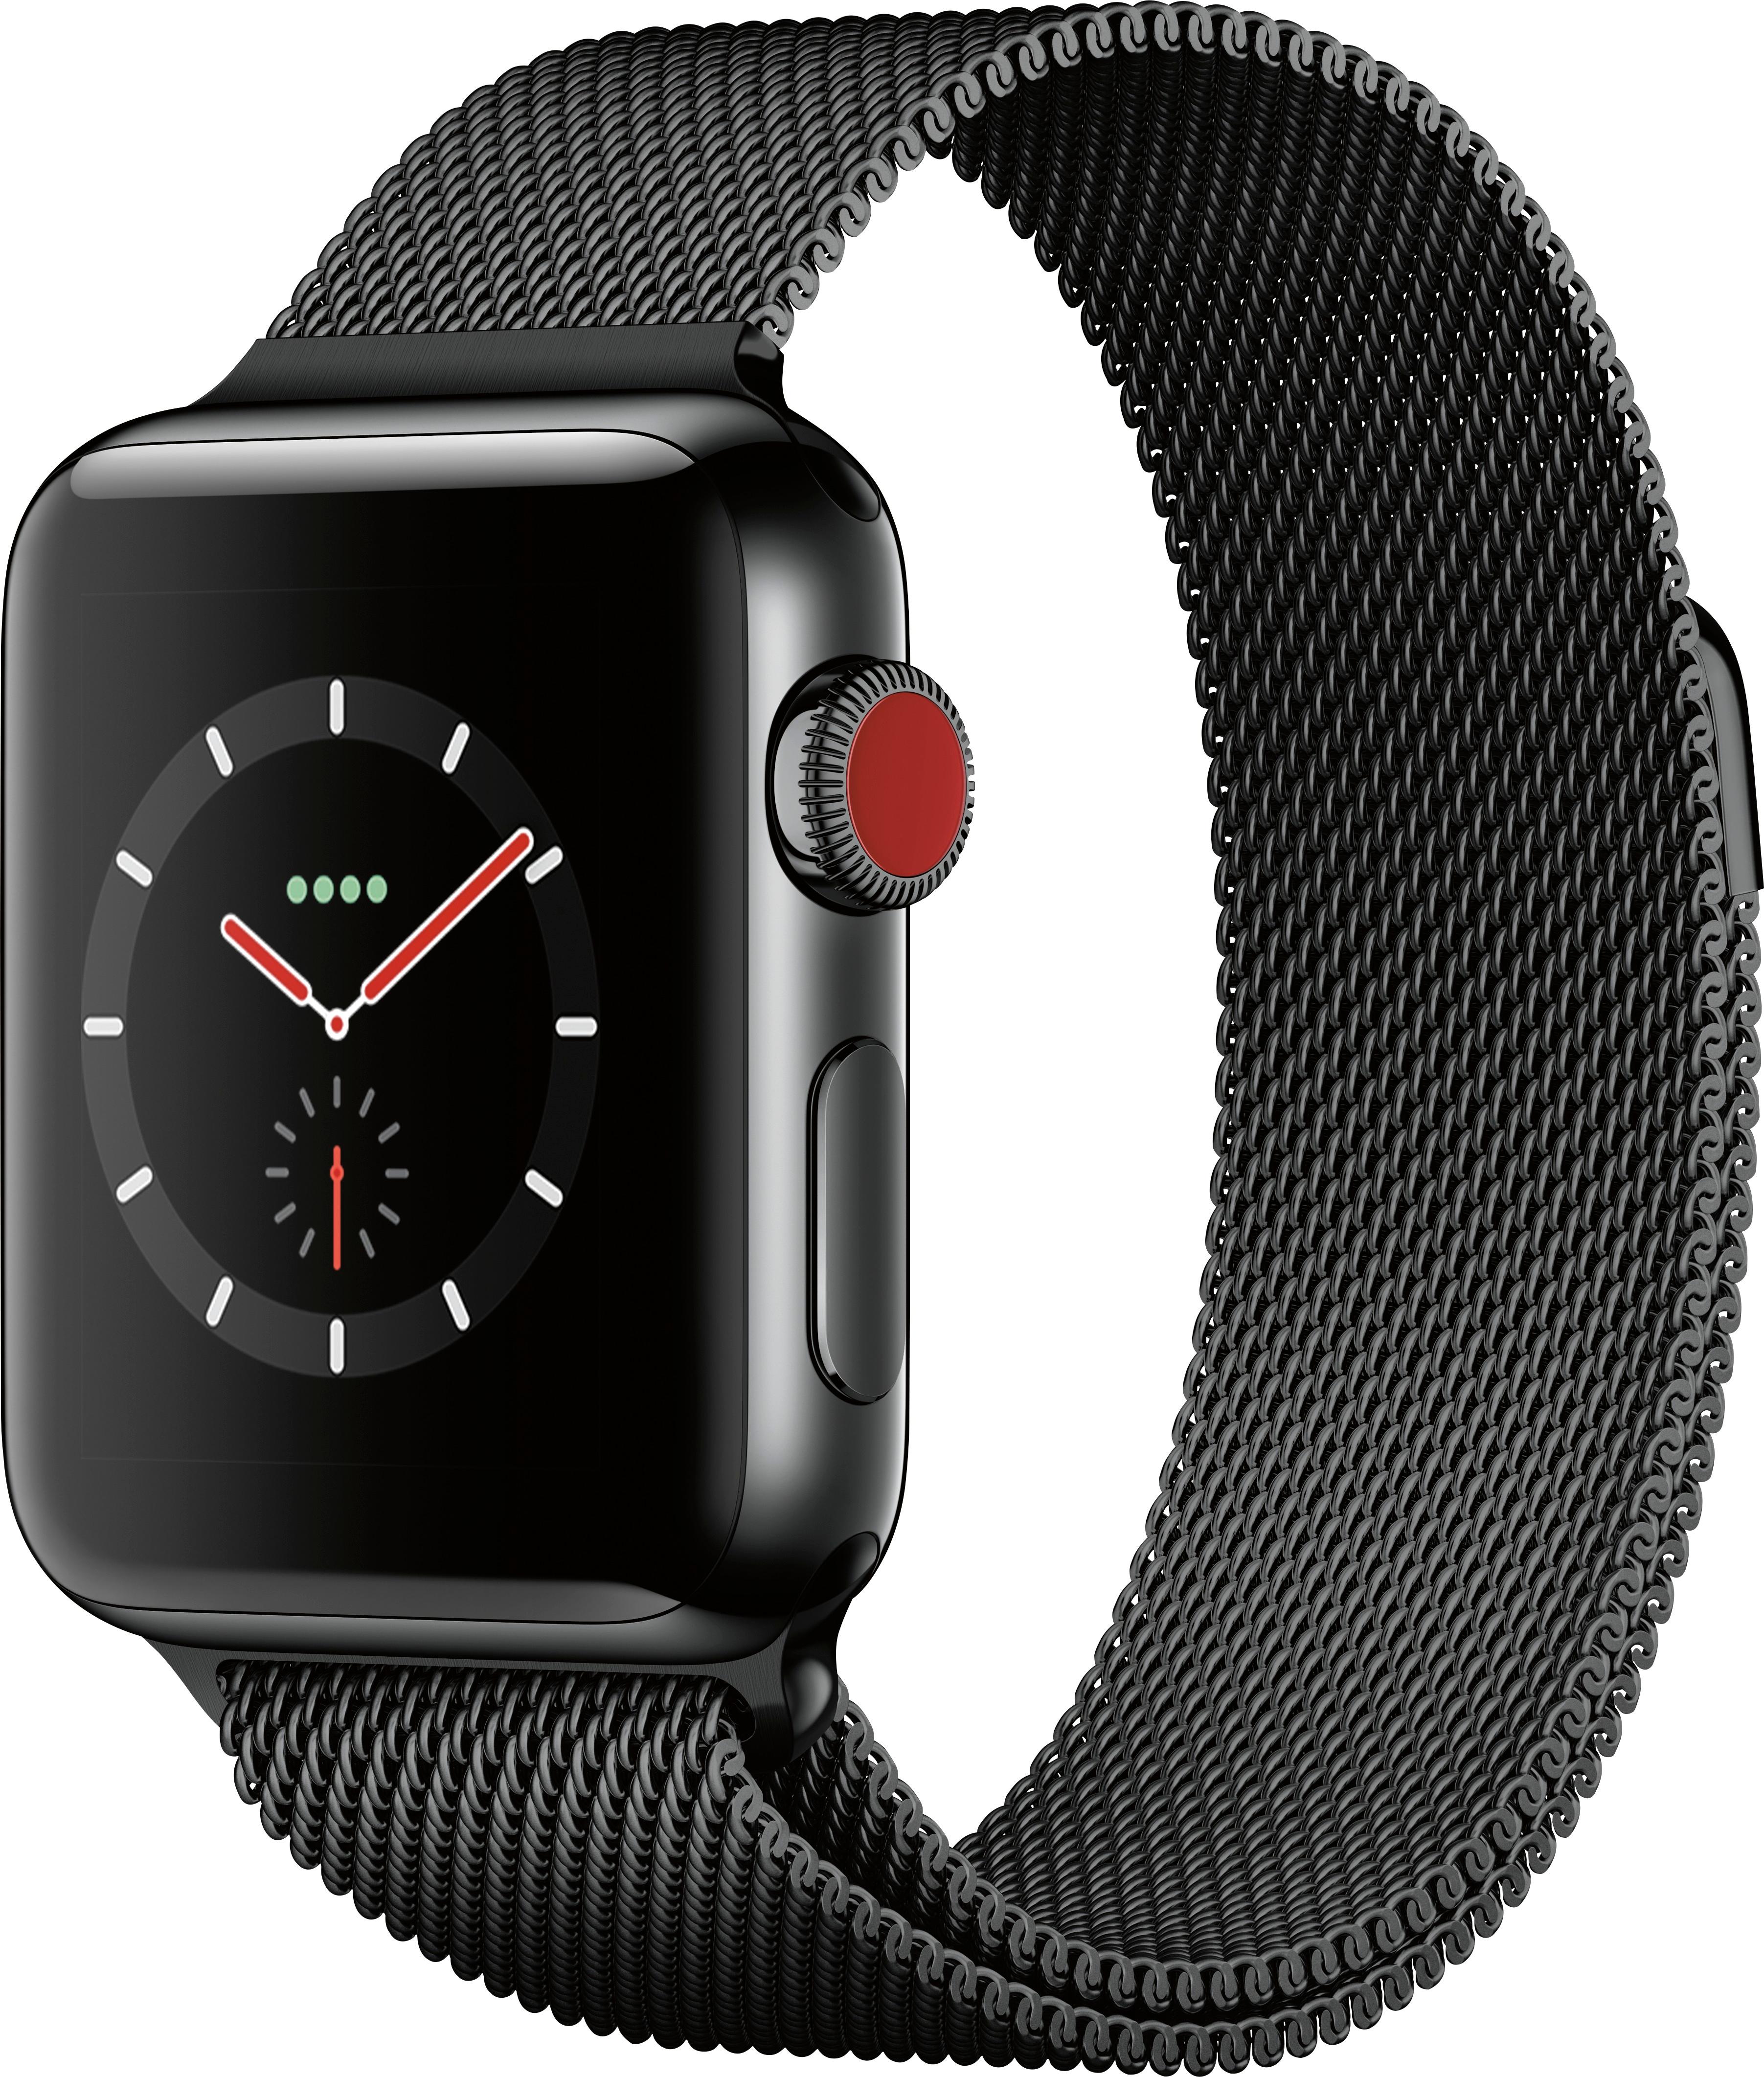 apple watch with cellular series 3